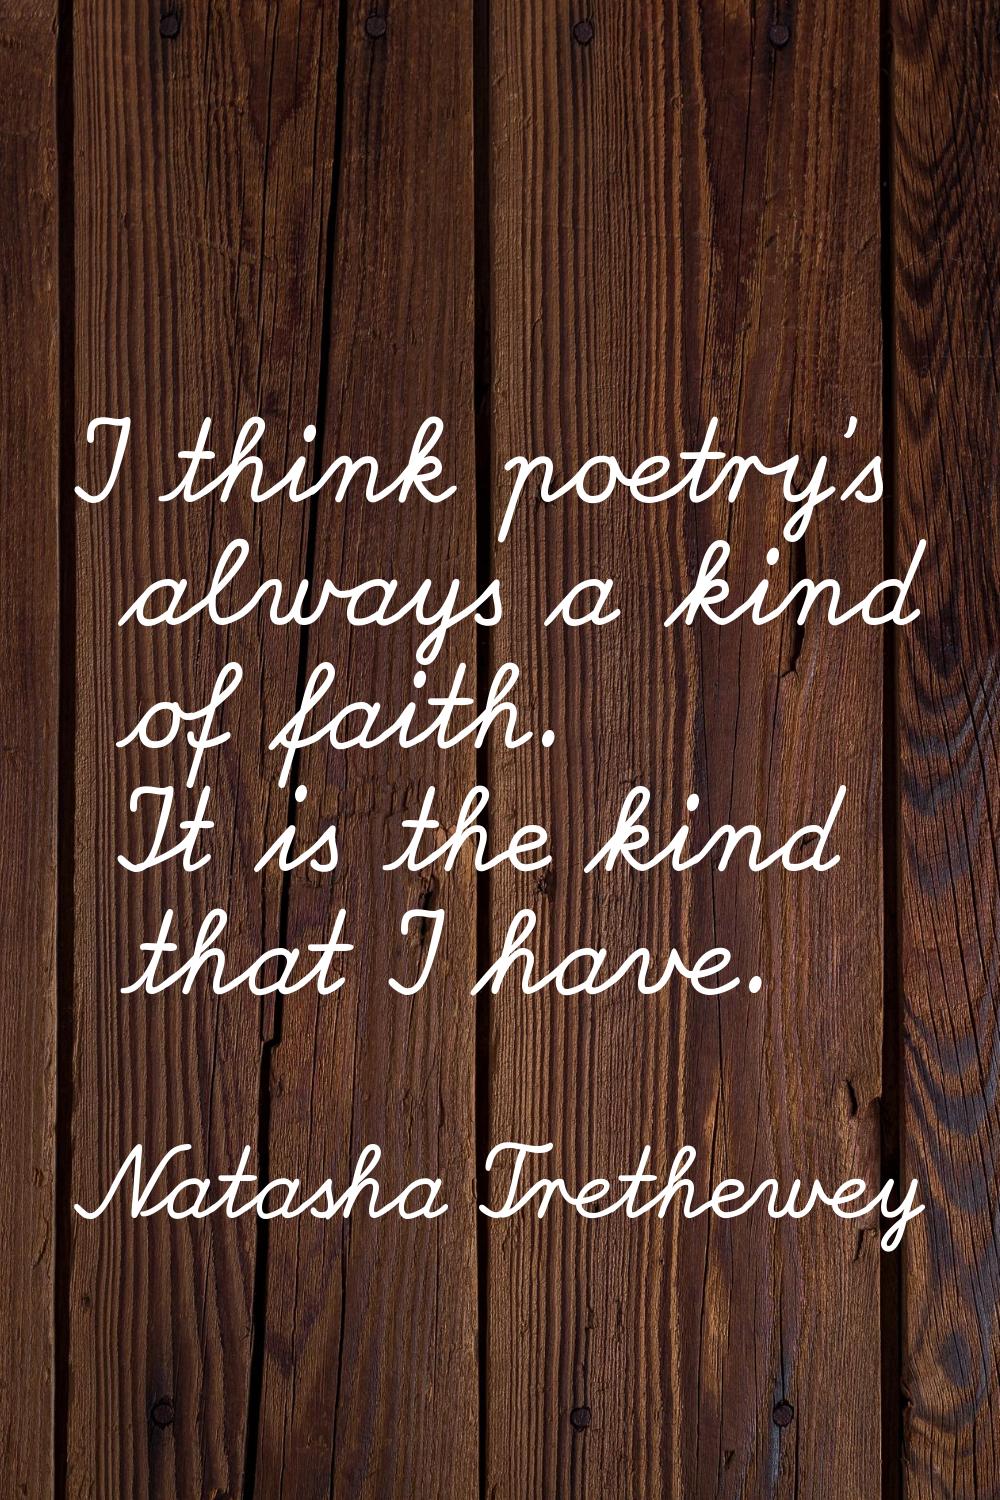 I think poetry's always a kind of faith. It is the kind that I have.